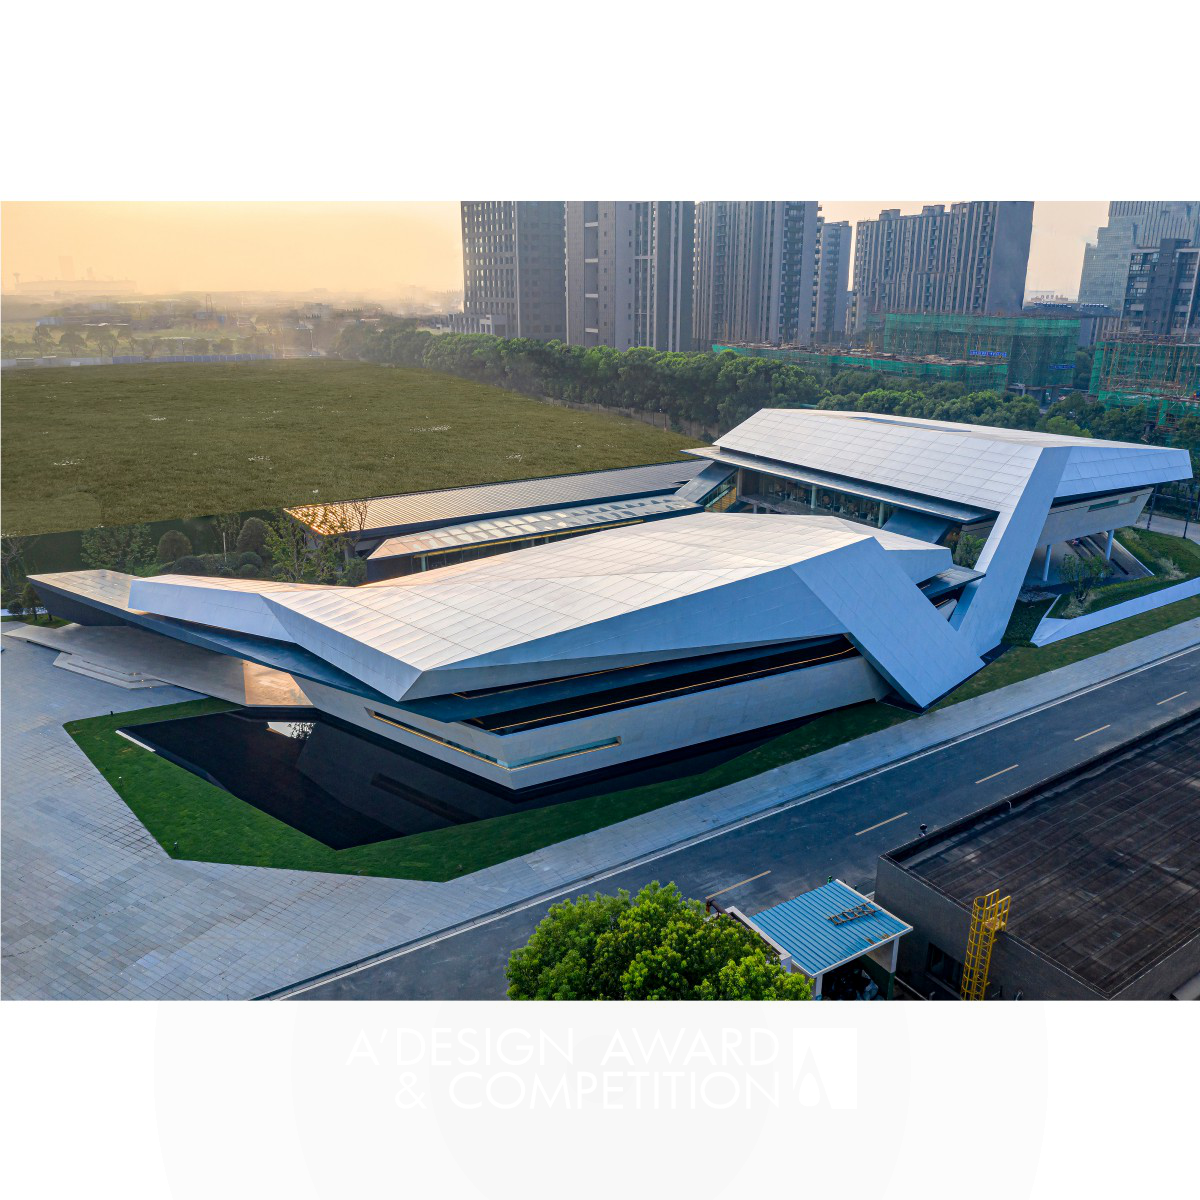 Kris Lin wins Golden at the prestigious A' Architecture, Building and Structure Design Award with Fly Exhibition Center.